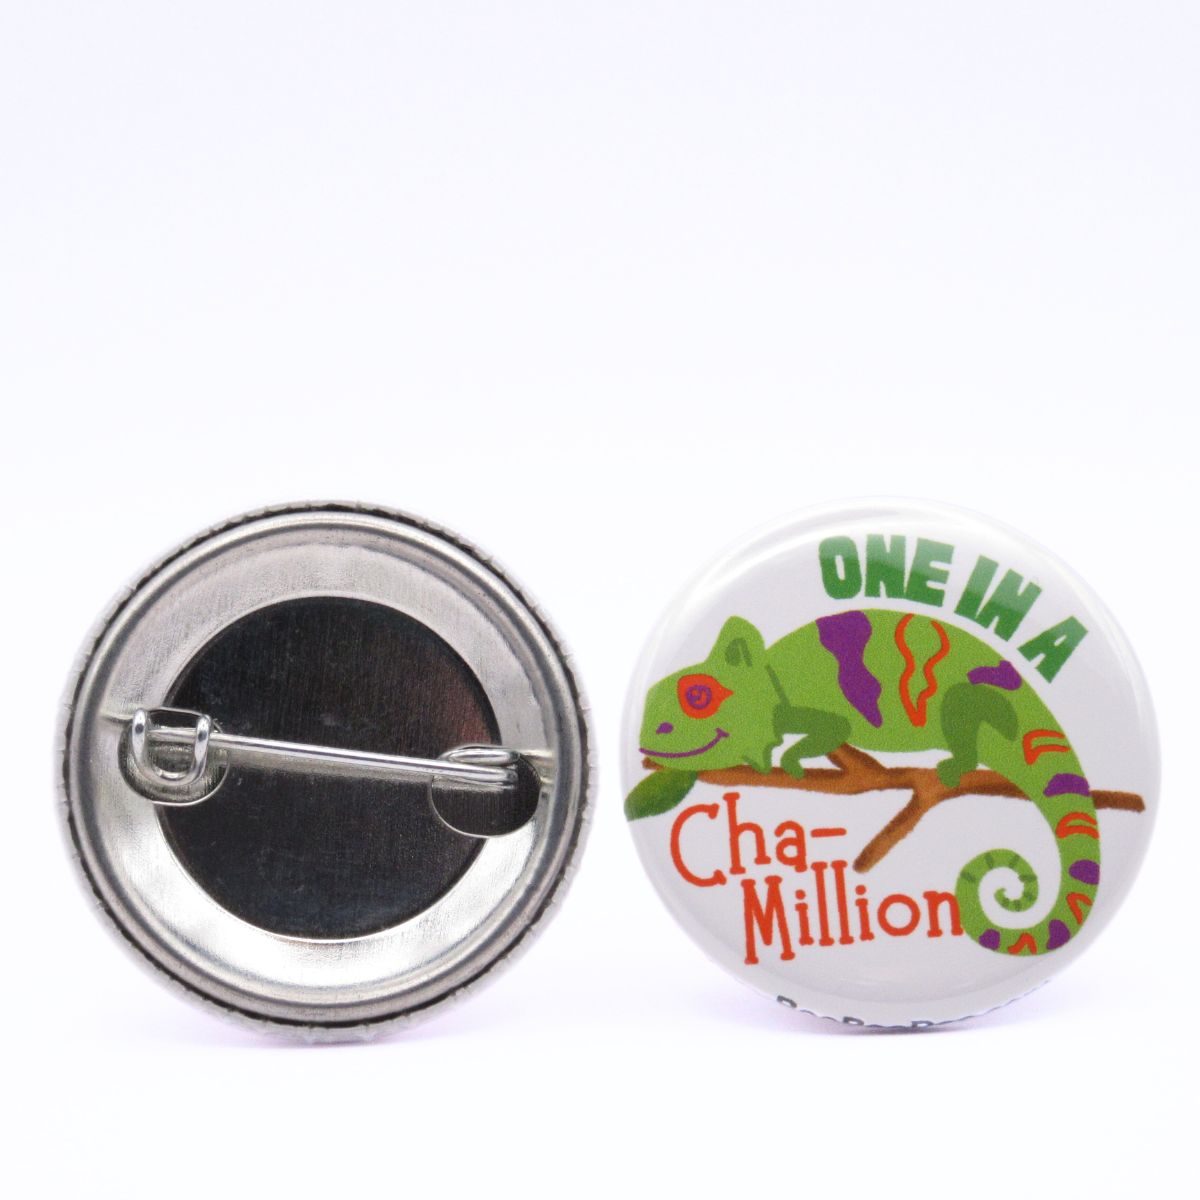 BooBooRoo Pinback Button (i.e. button, badge, pin) of a chameleon on a branch with the saying, "One in a Cha-million." Image showing front and back of high-quality metal button.